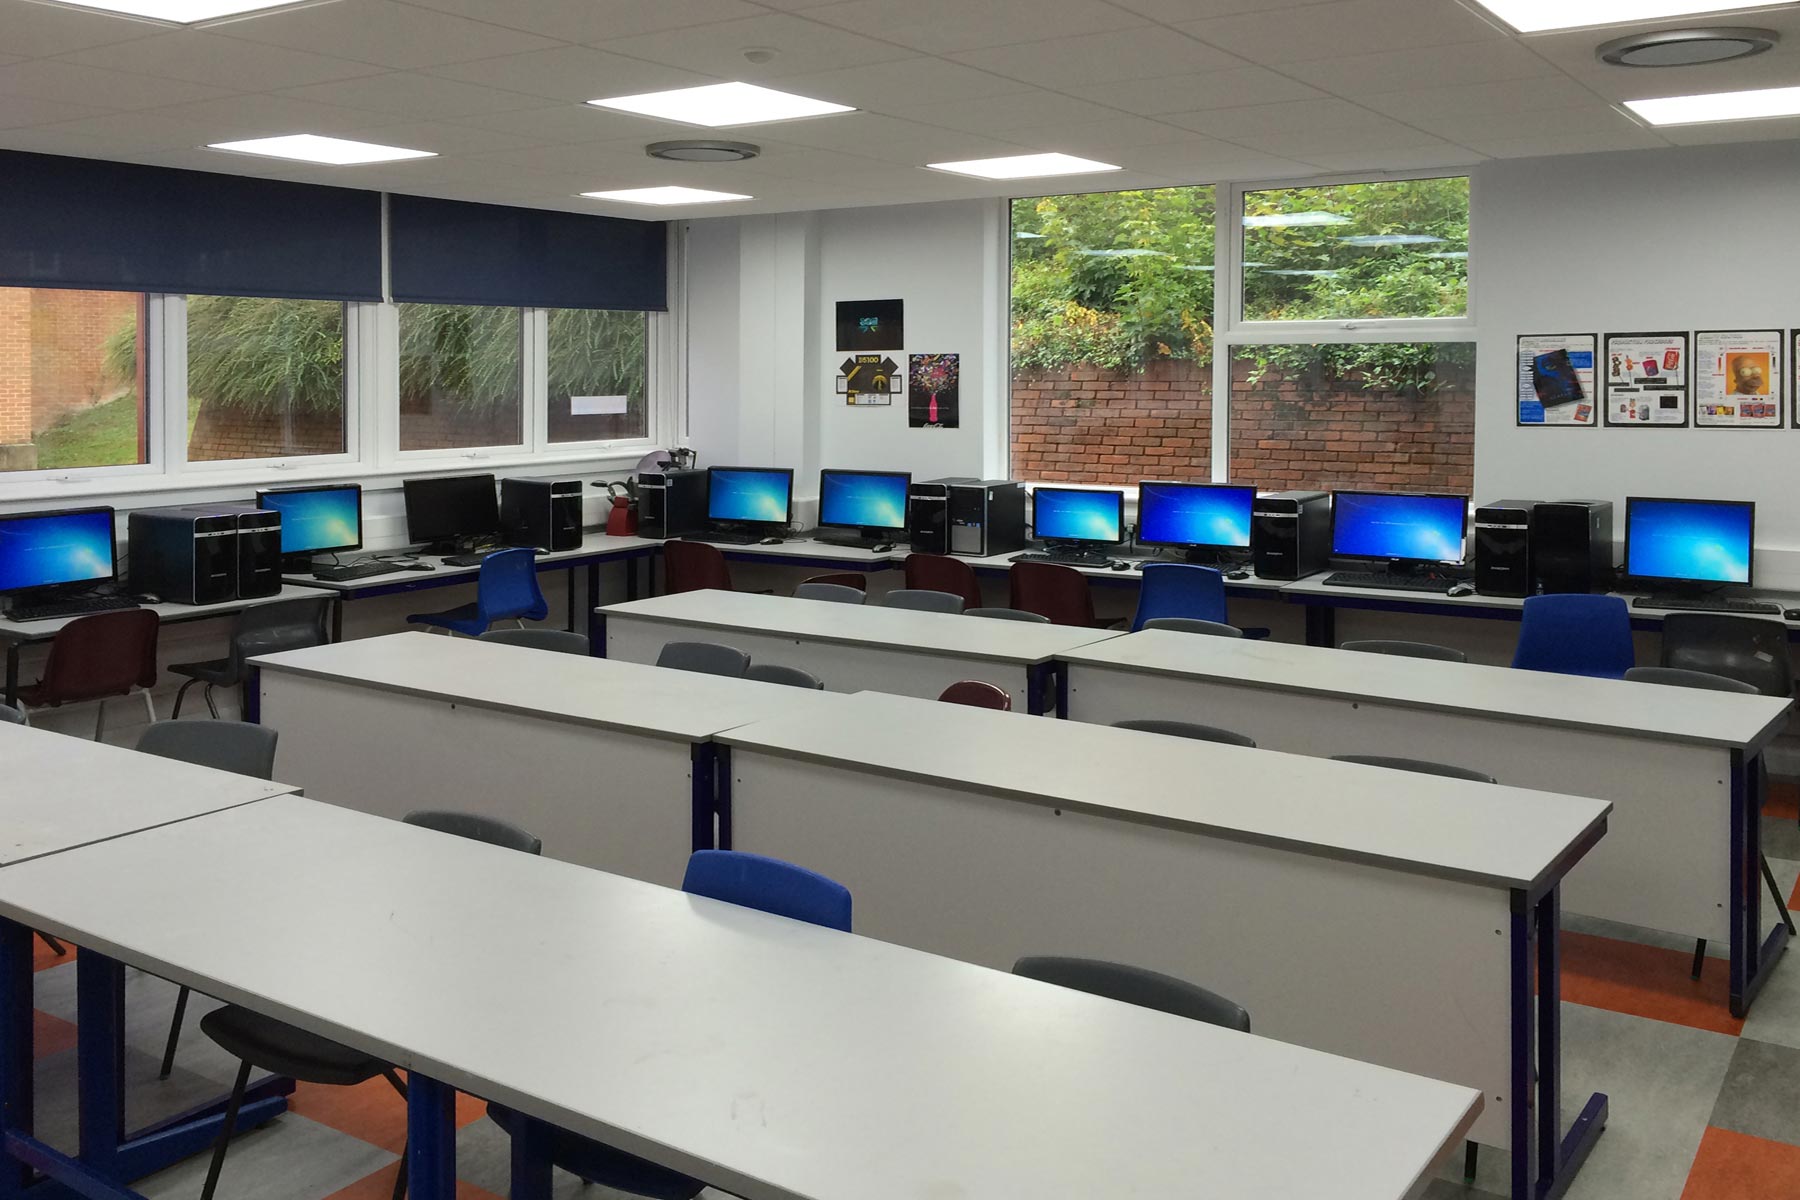 Guildford County School Refurbished Design and Technology Classrooms